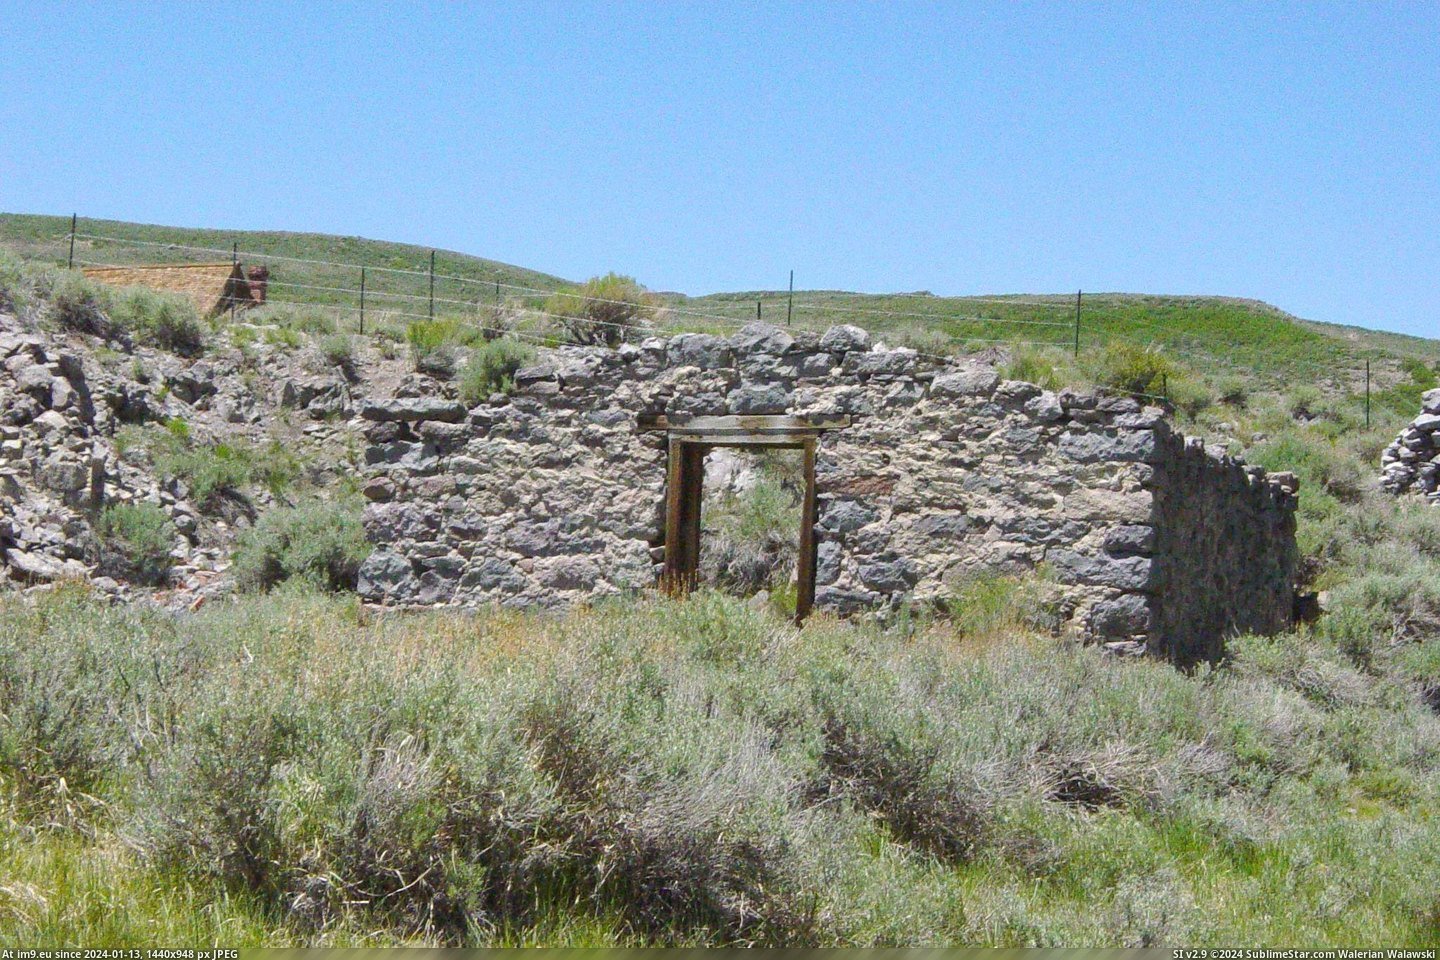 #California #Ruins #Moyle #Bodie #Warehouse Moyle Warehouse Ruins In Bodie, California Pic. (Изображение из альбом Bodie - a ghost town in Eastern California))